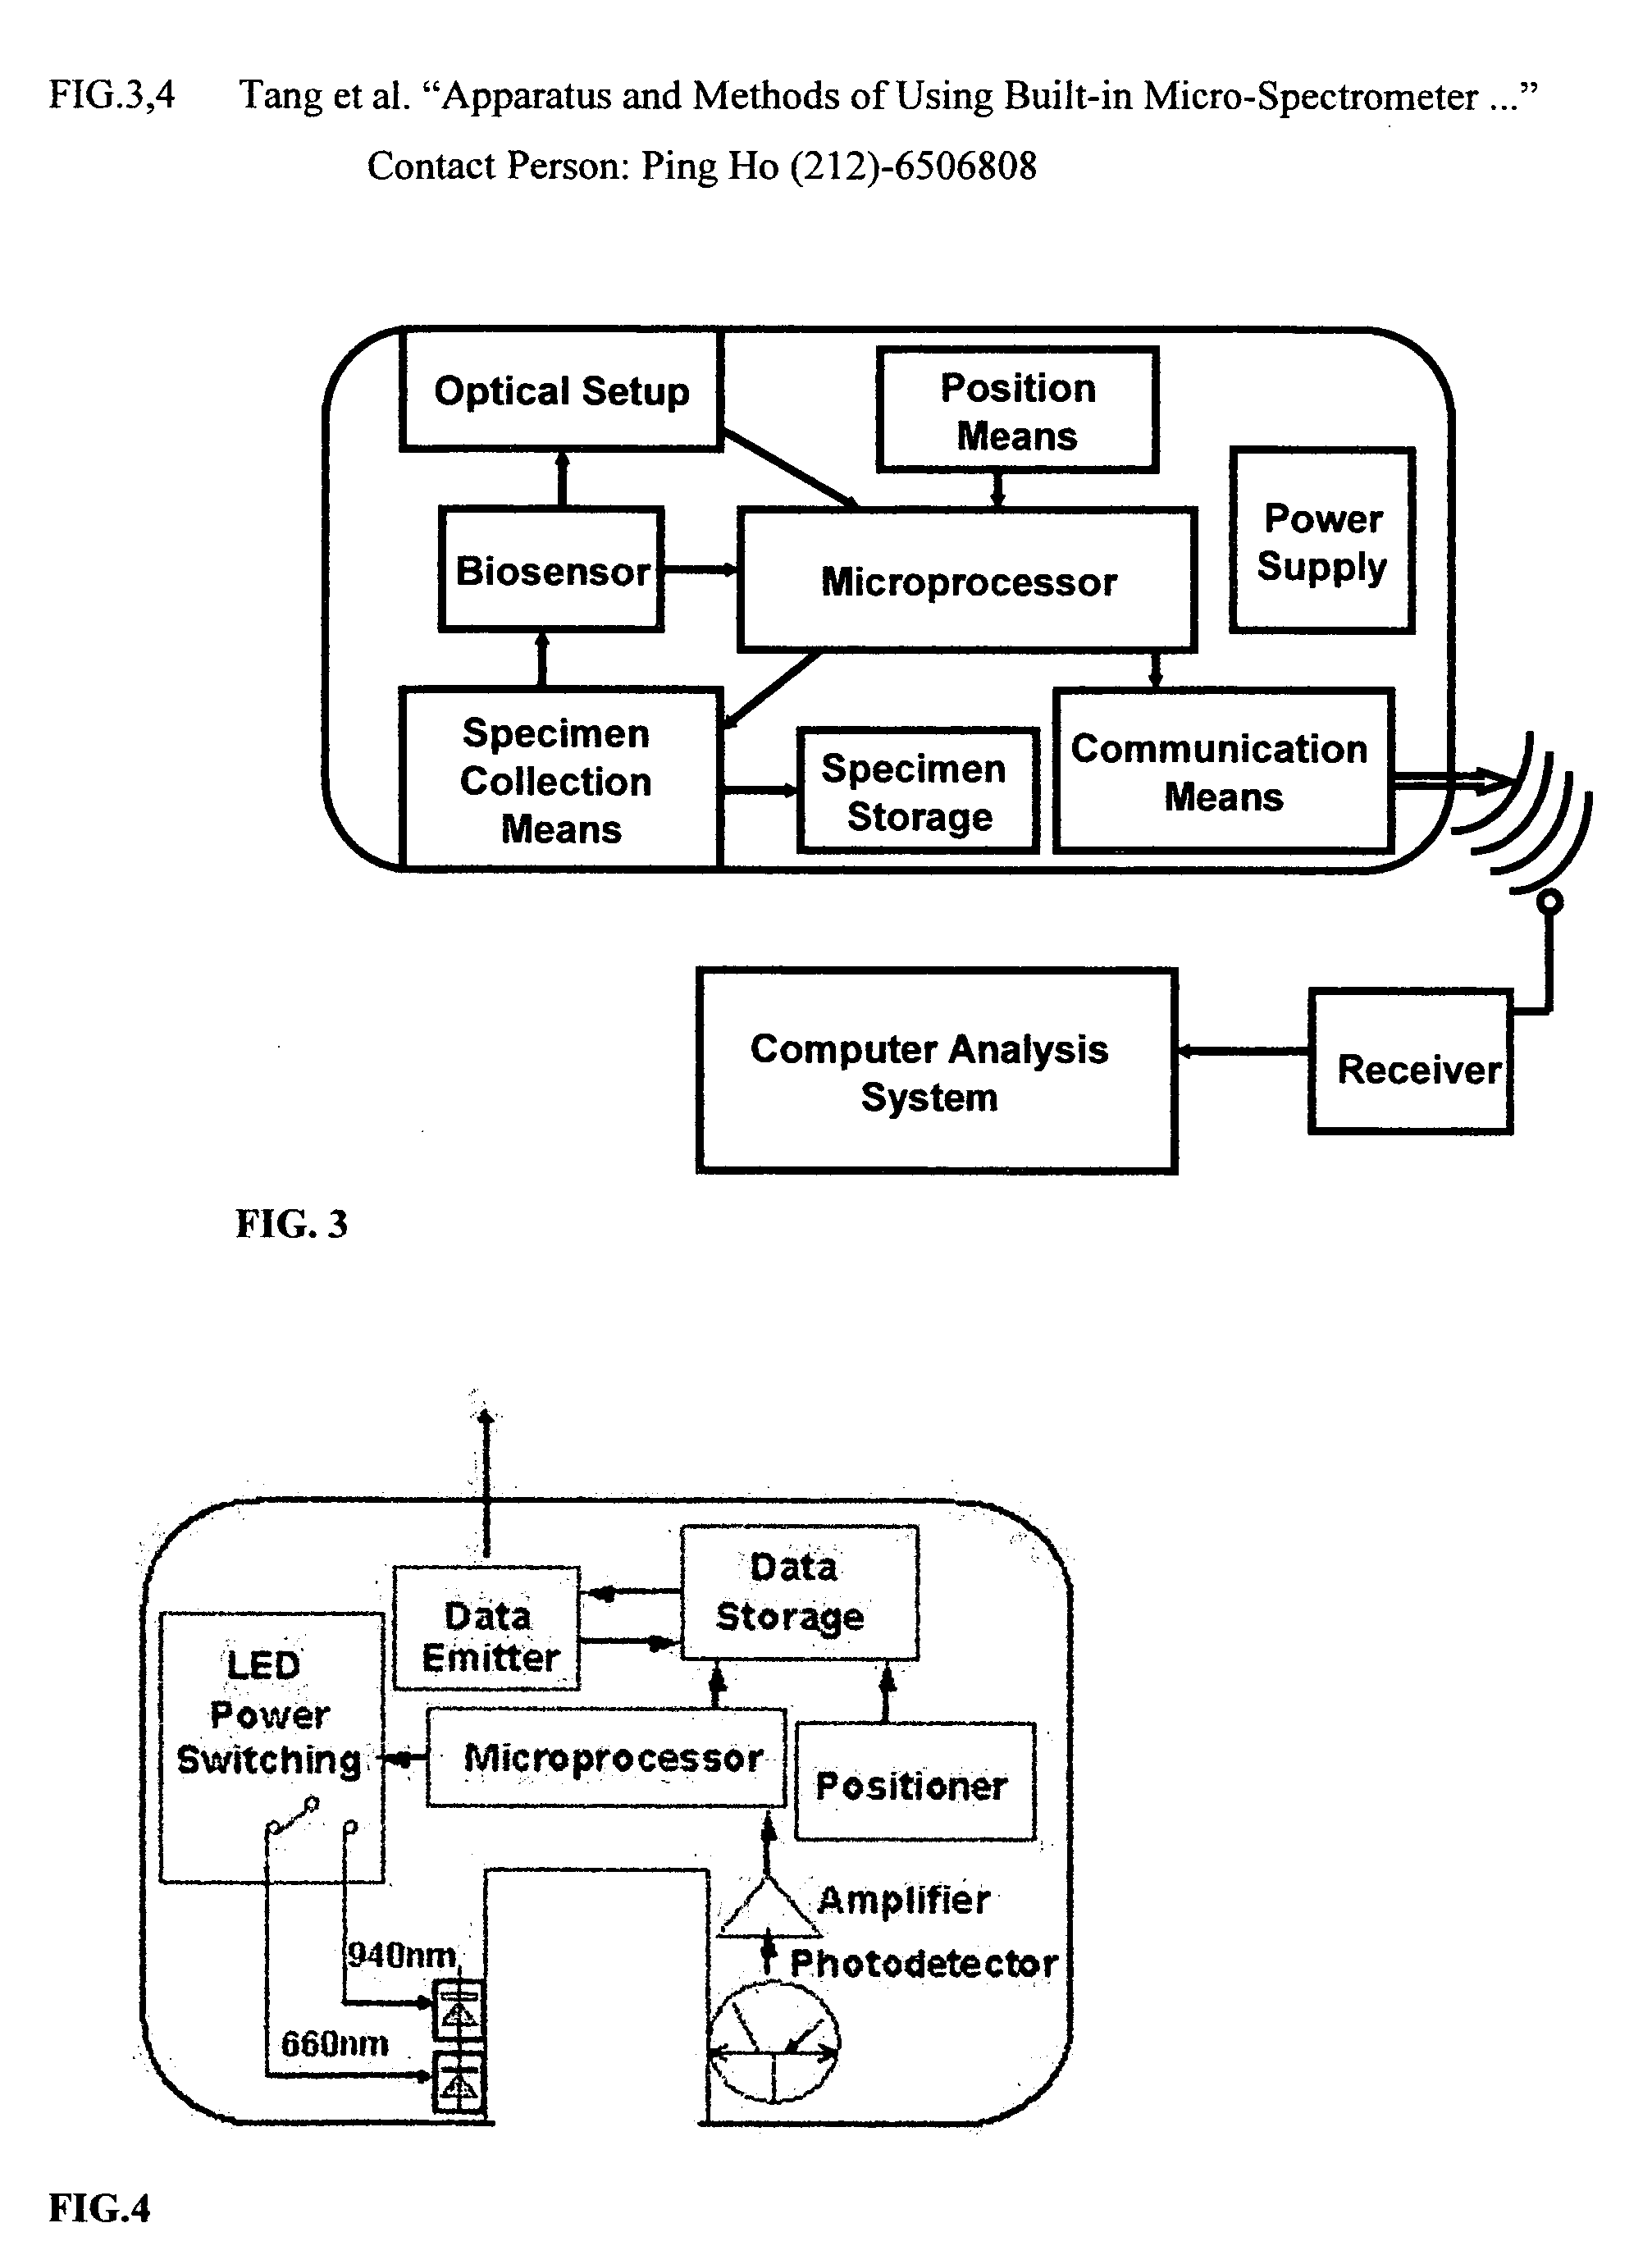 Apparatus and methods of using built-in micro-spectroscopy micro-biosensors and specimen collection system for a wireless capsule in a biological body in vivo